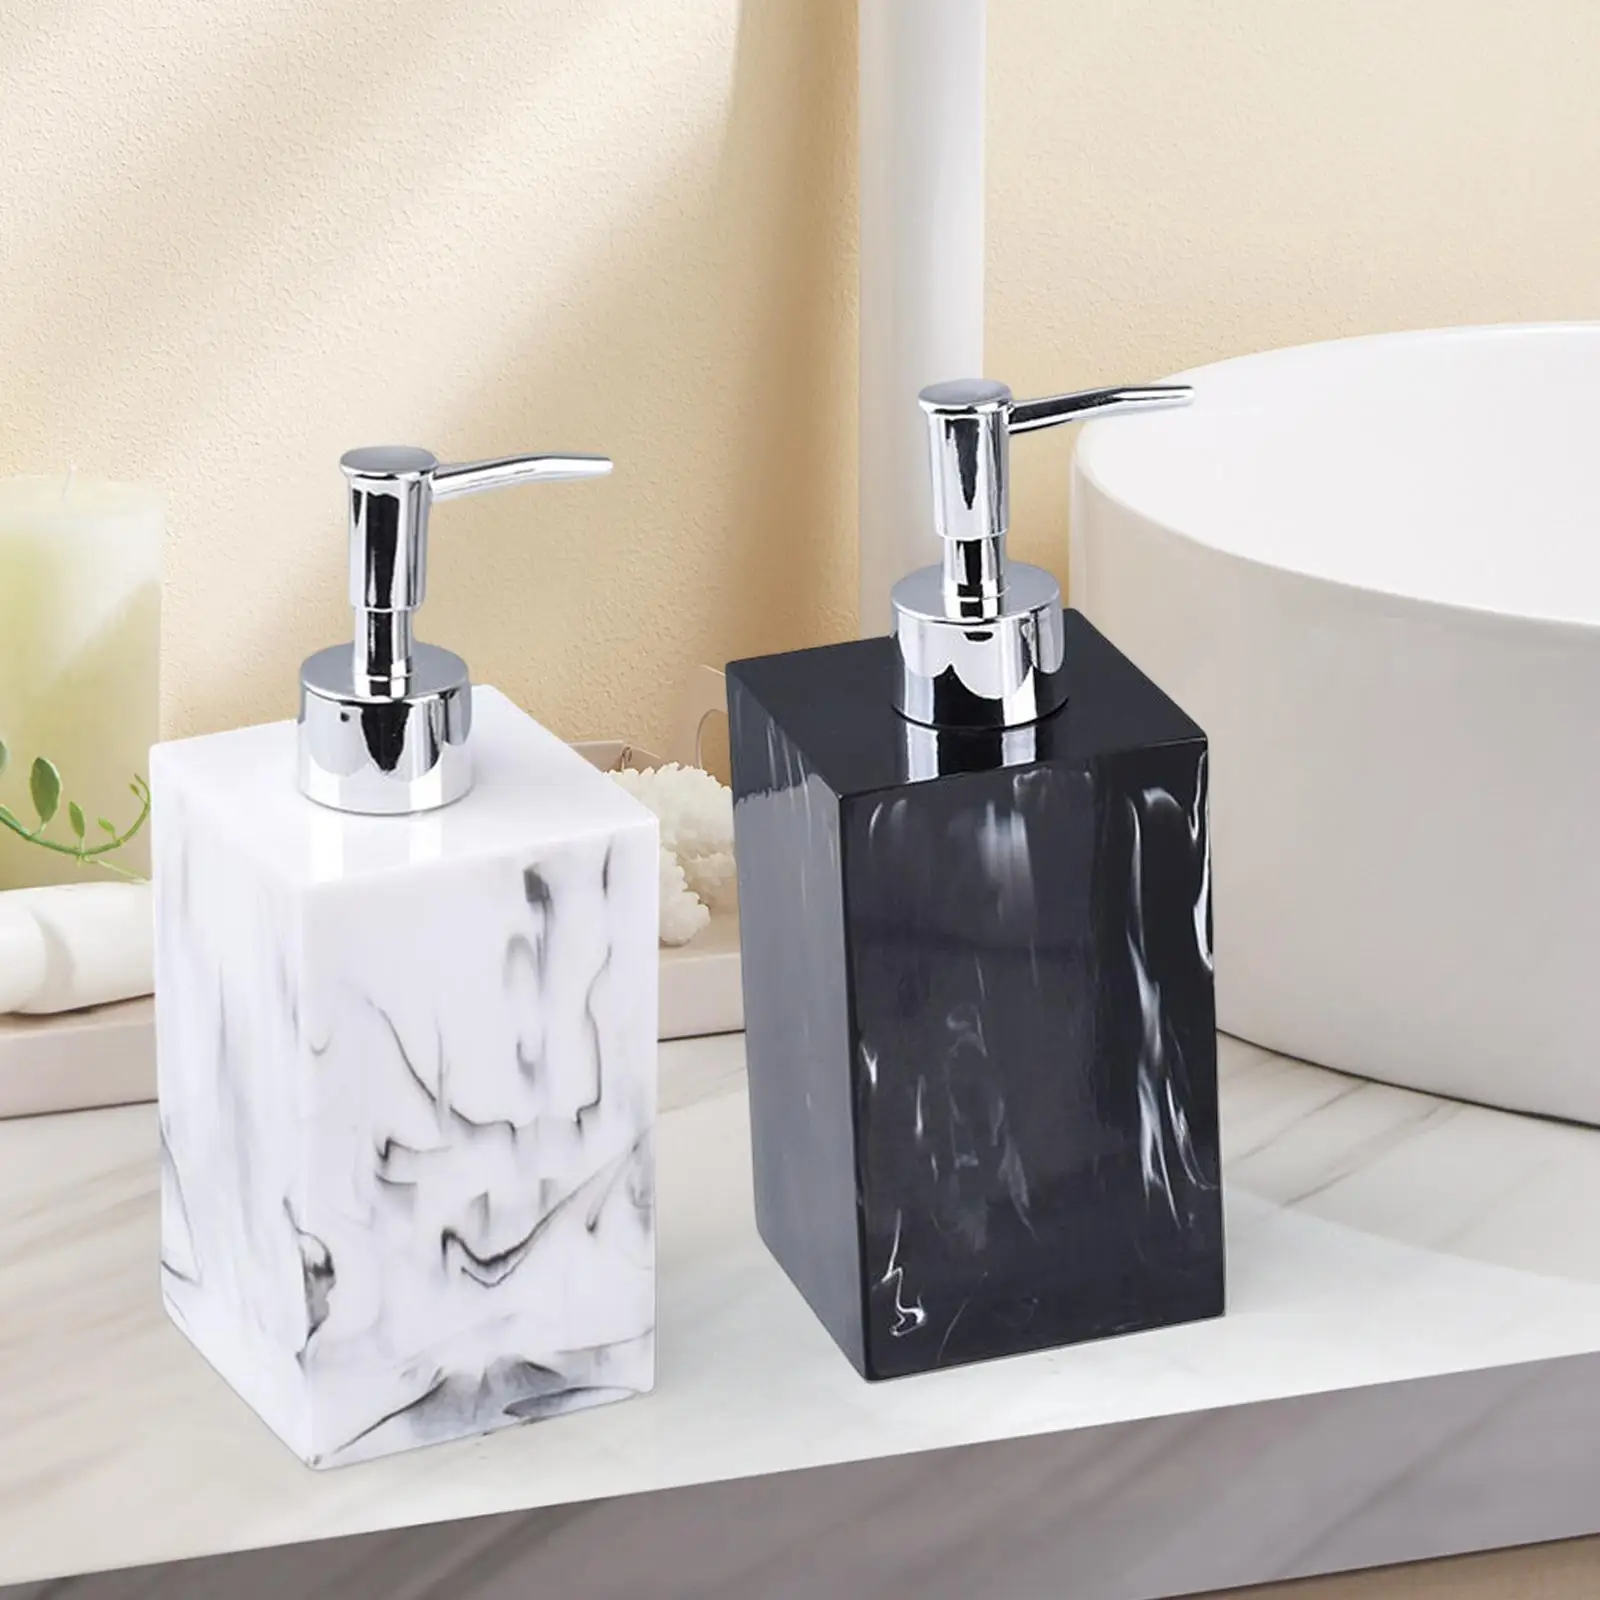 Empty Soap Dispenser Resin 500ml with Pump Refillable Container Bottle for Conditioner Hand Soap Bathroom Home